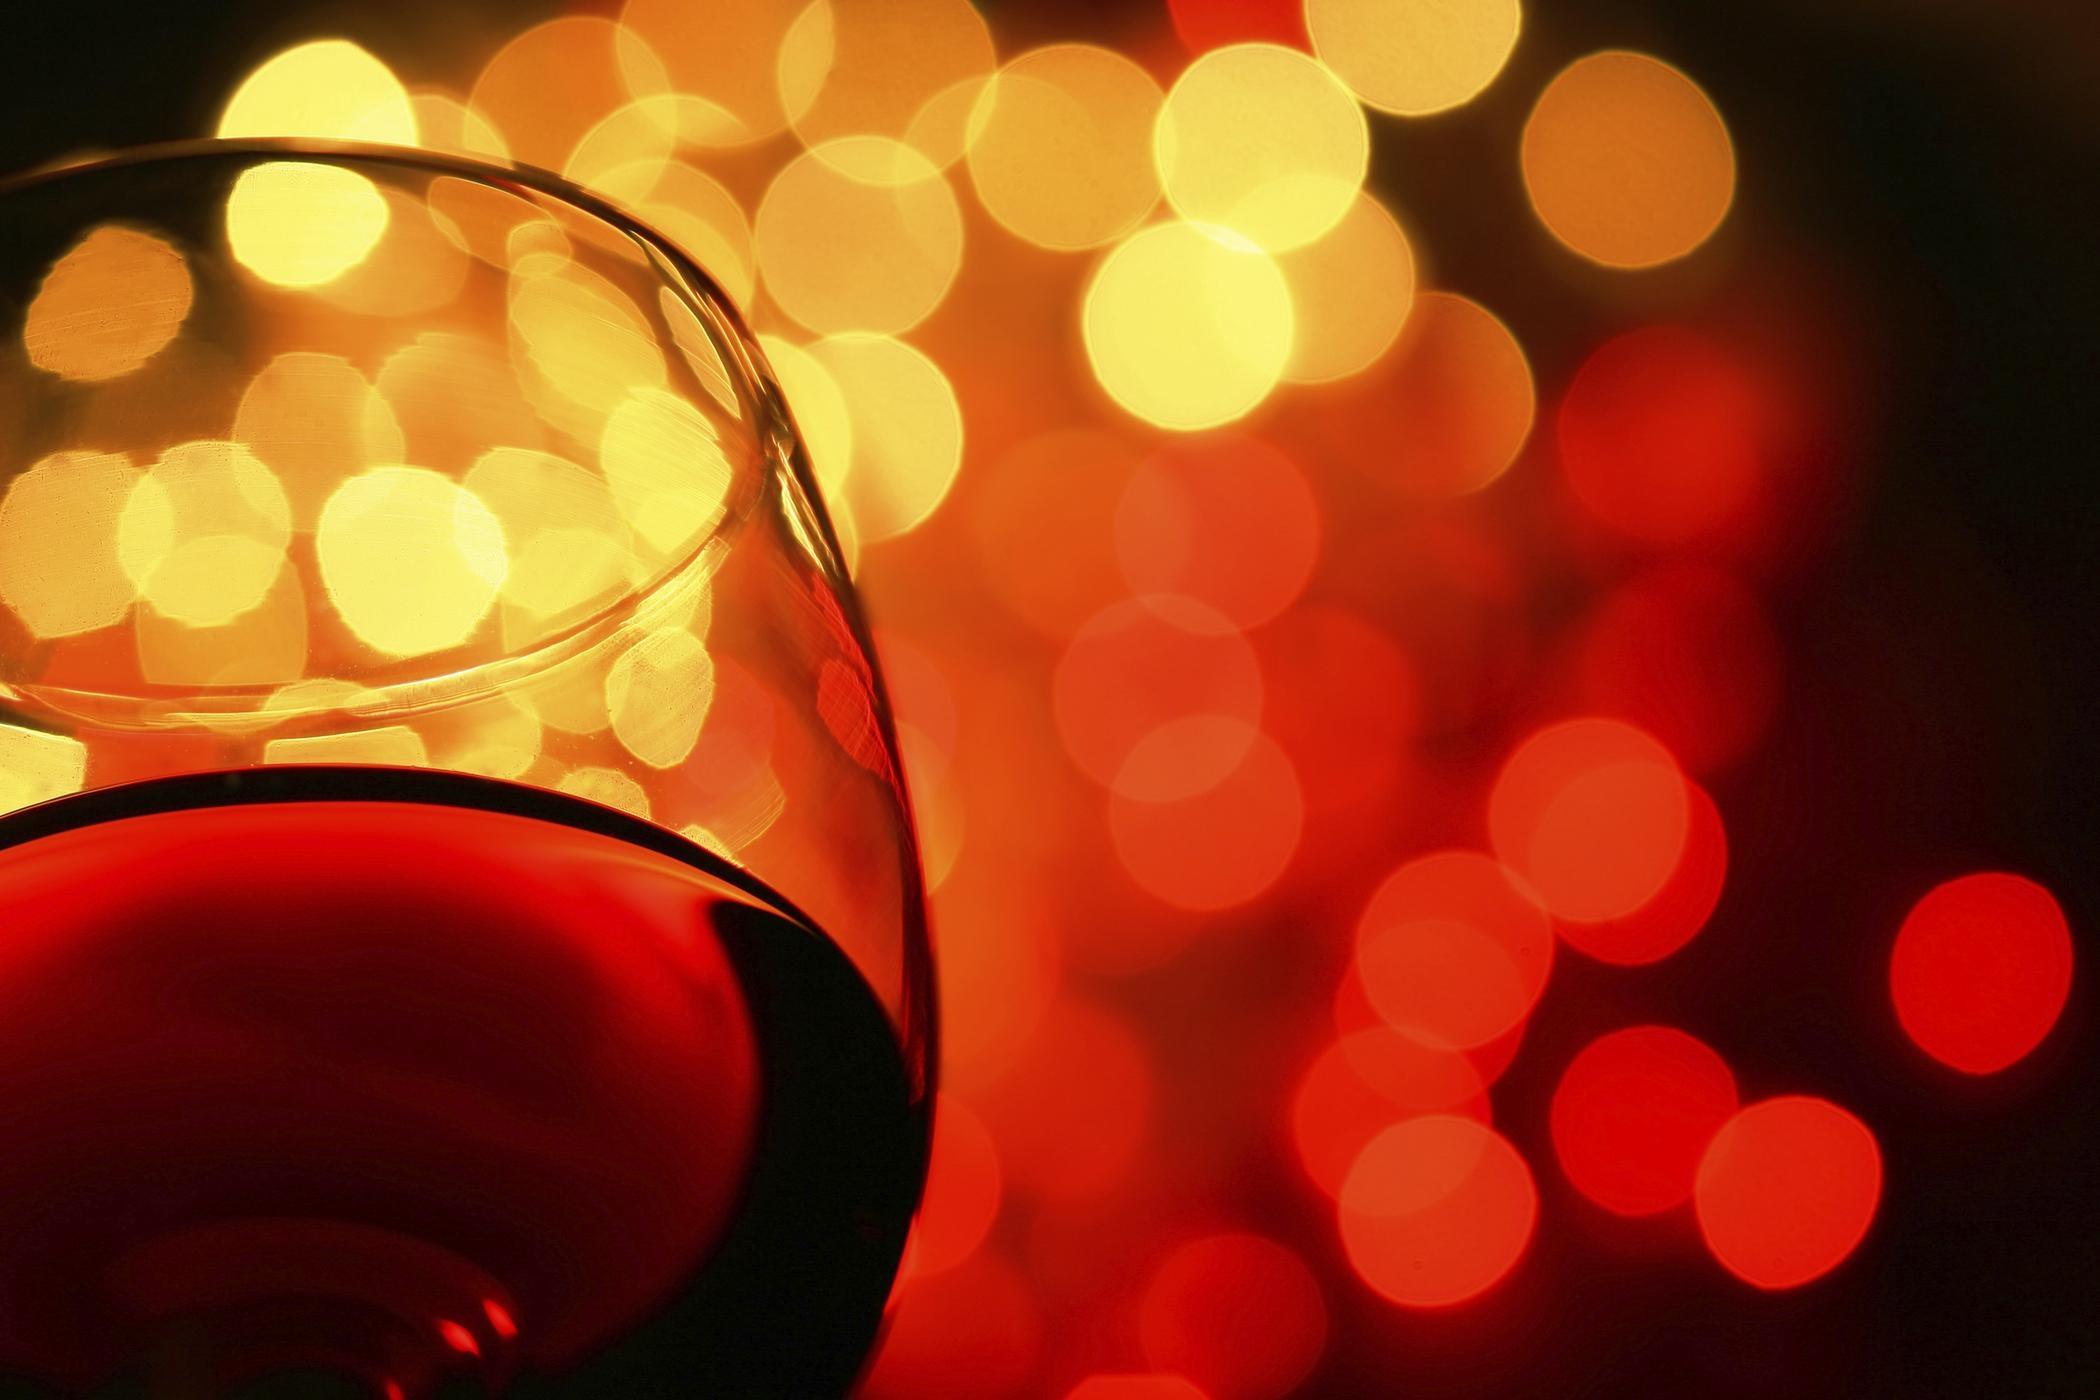 Exclusive Wine Gastronomic Dinner In Le Bourbon Restaurant In Budapest, 19 January